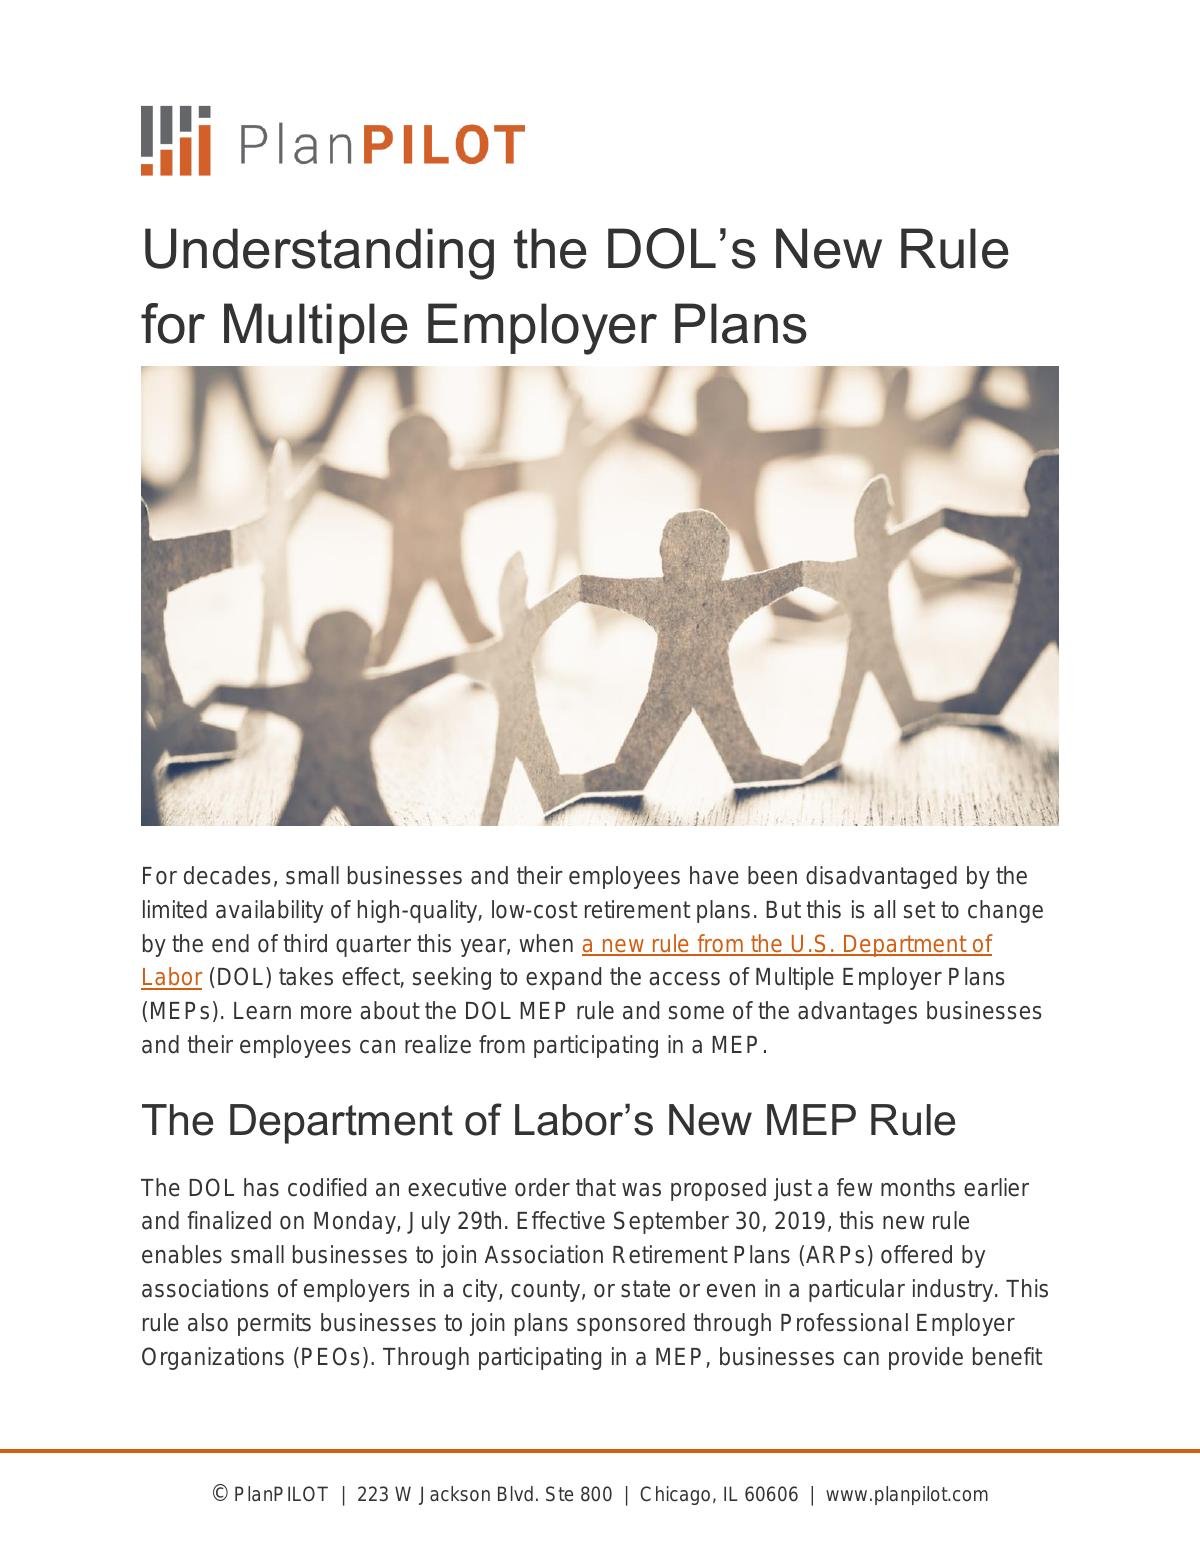 Understanding the DOL’s New Rule for Multiple Employer Plans